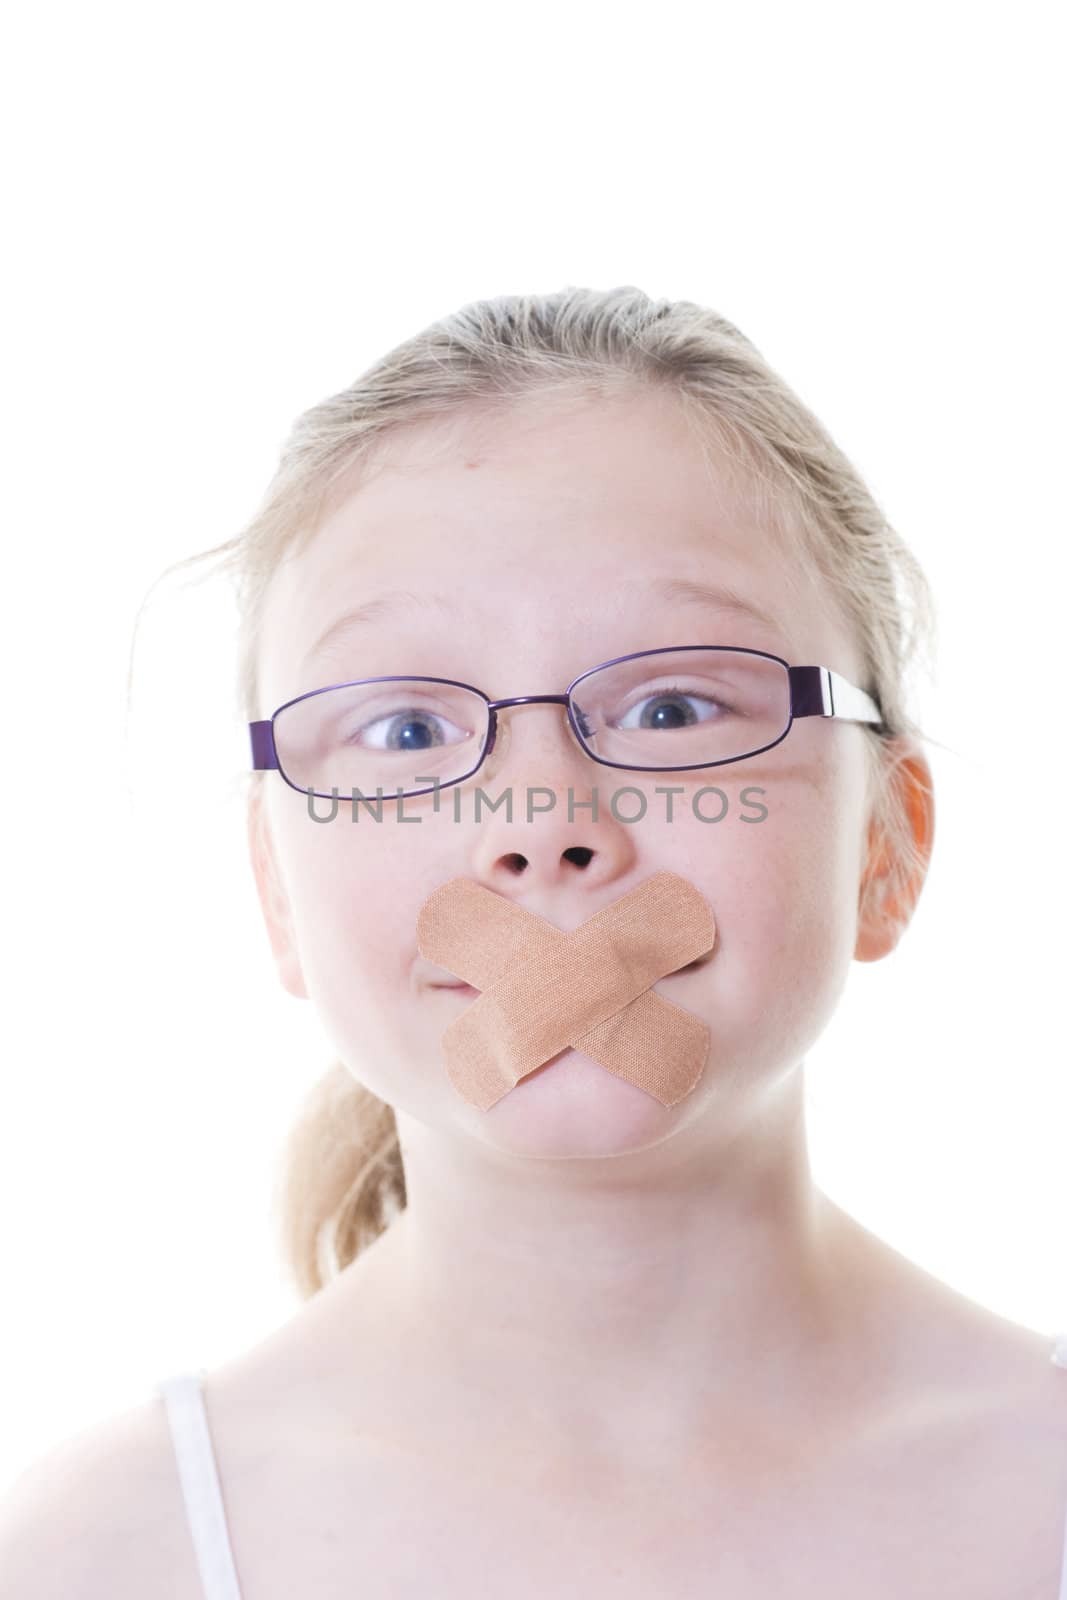 preteen girl with sticking plaster across her mouth